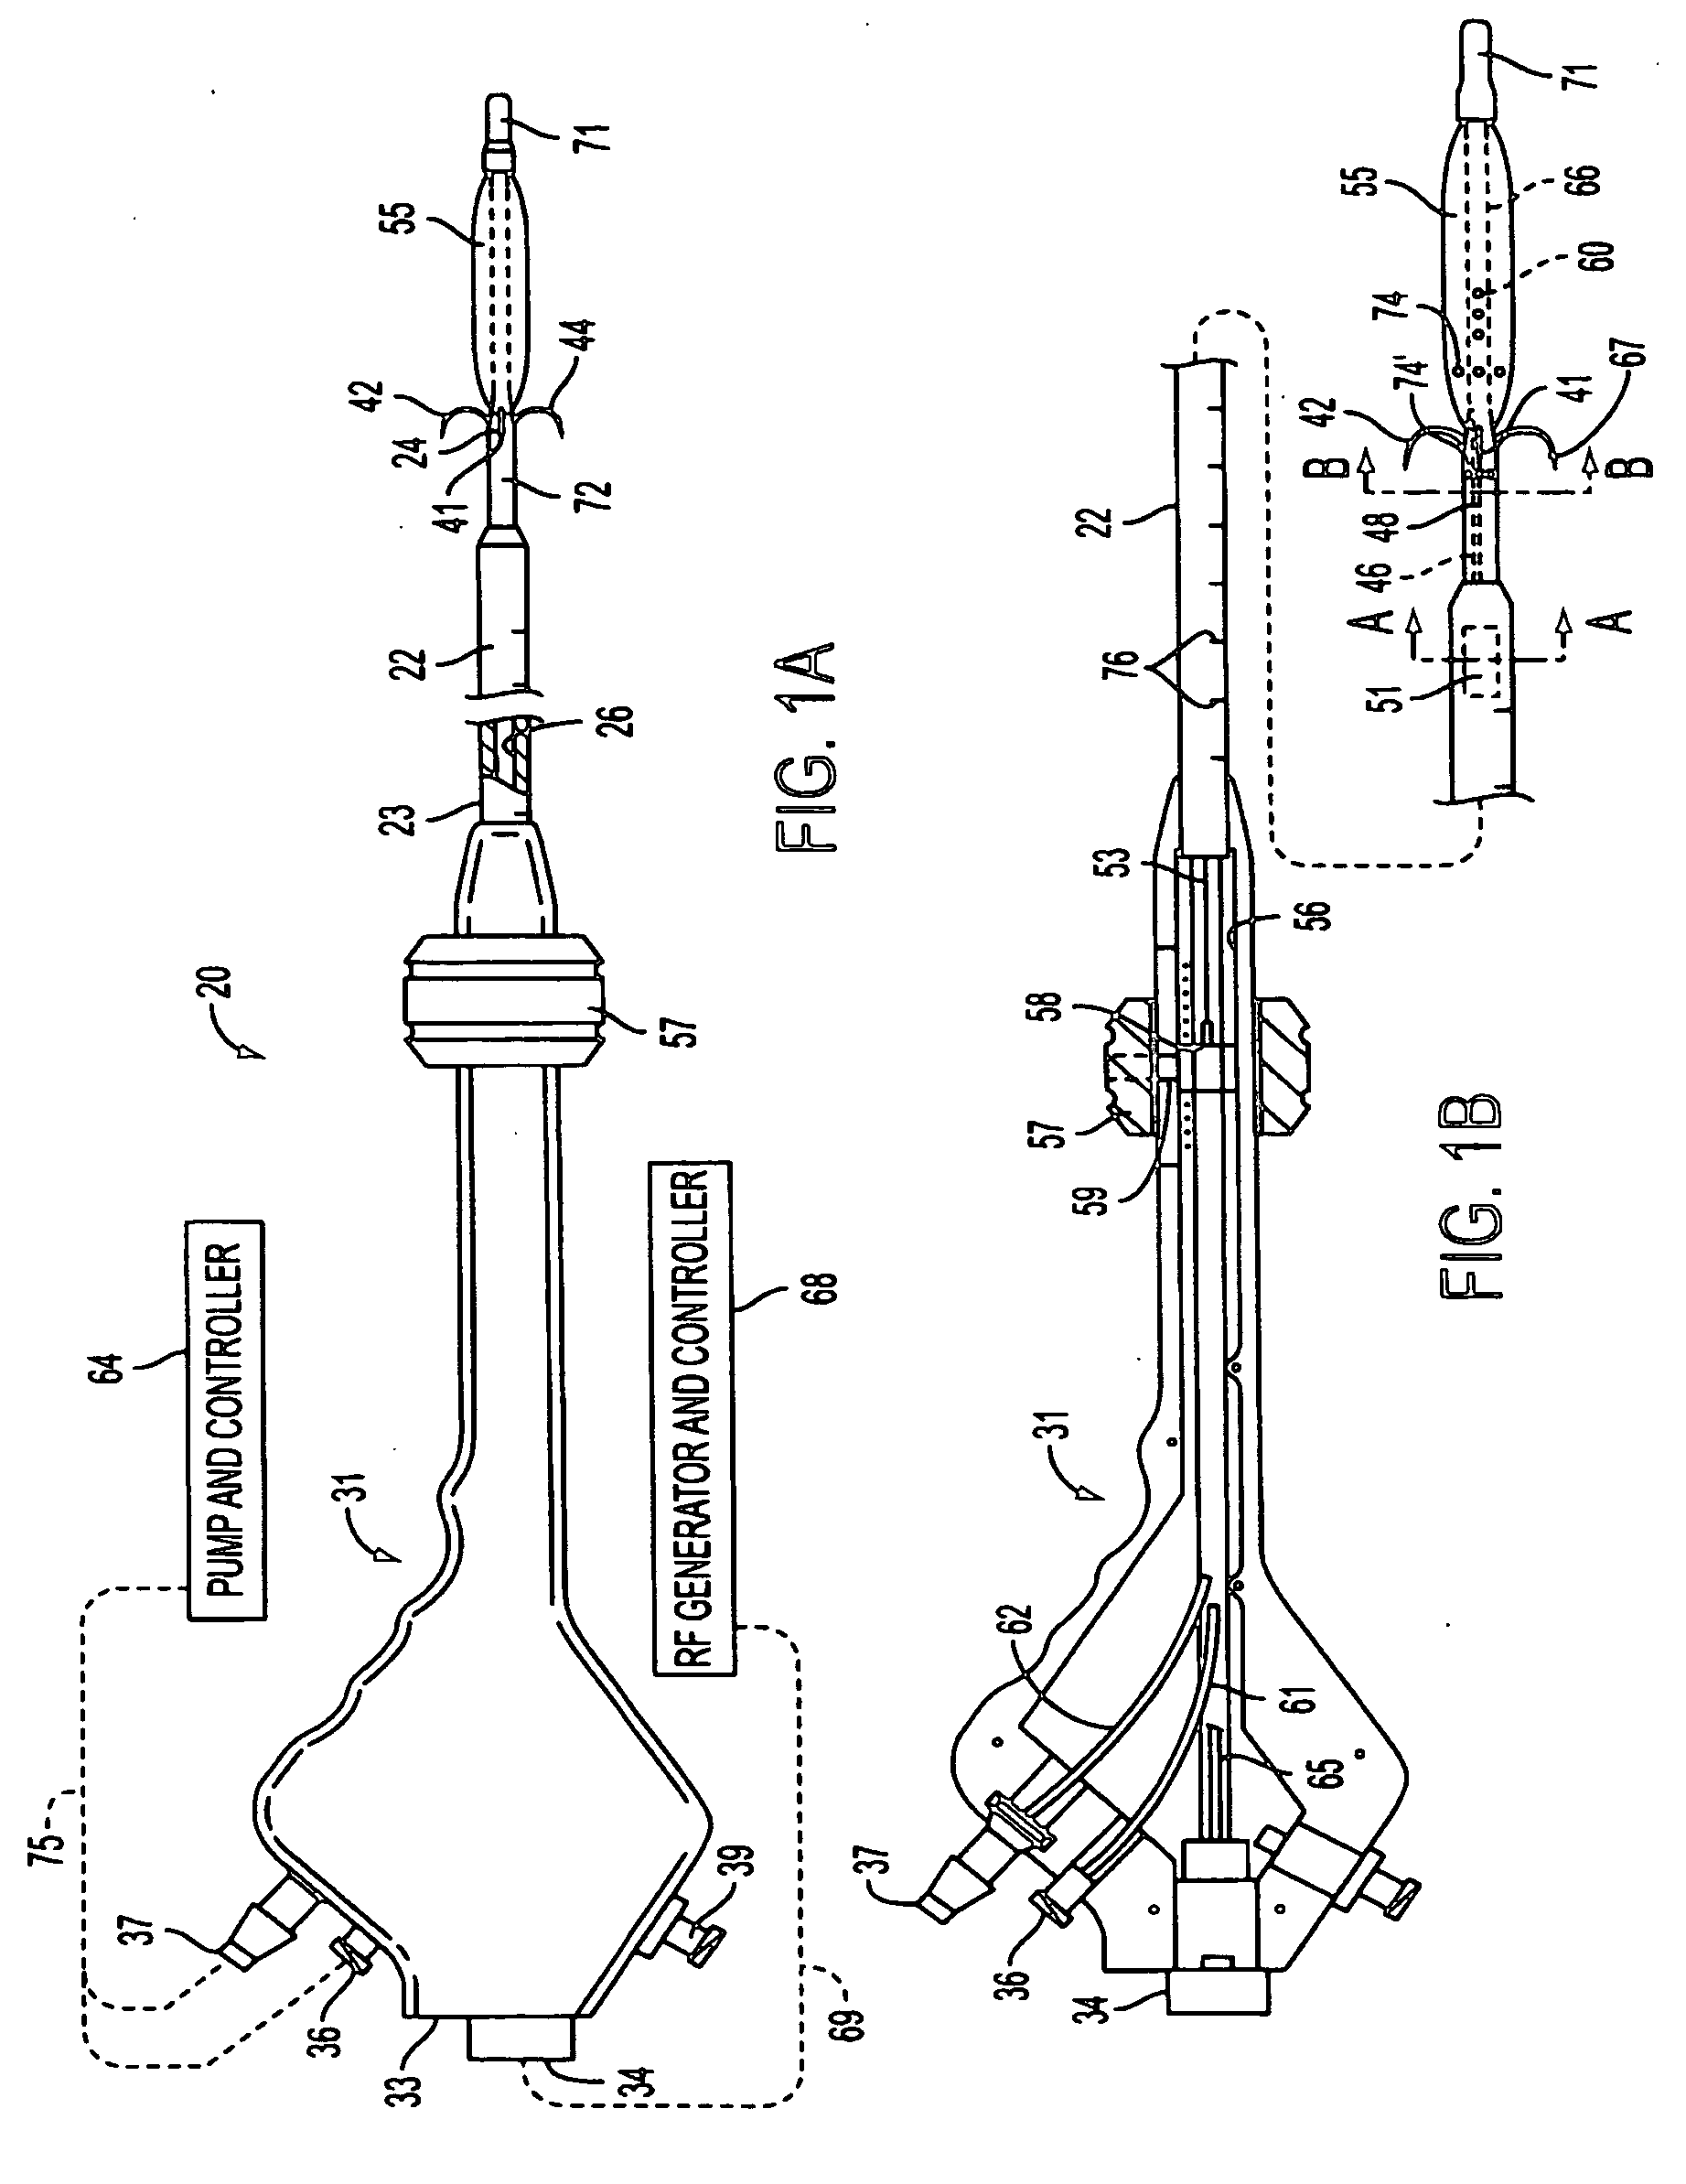 Apparatus and methods for treating female urinary incontinence